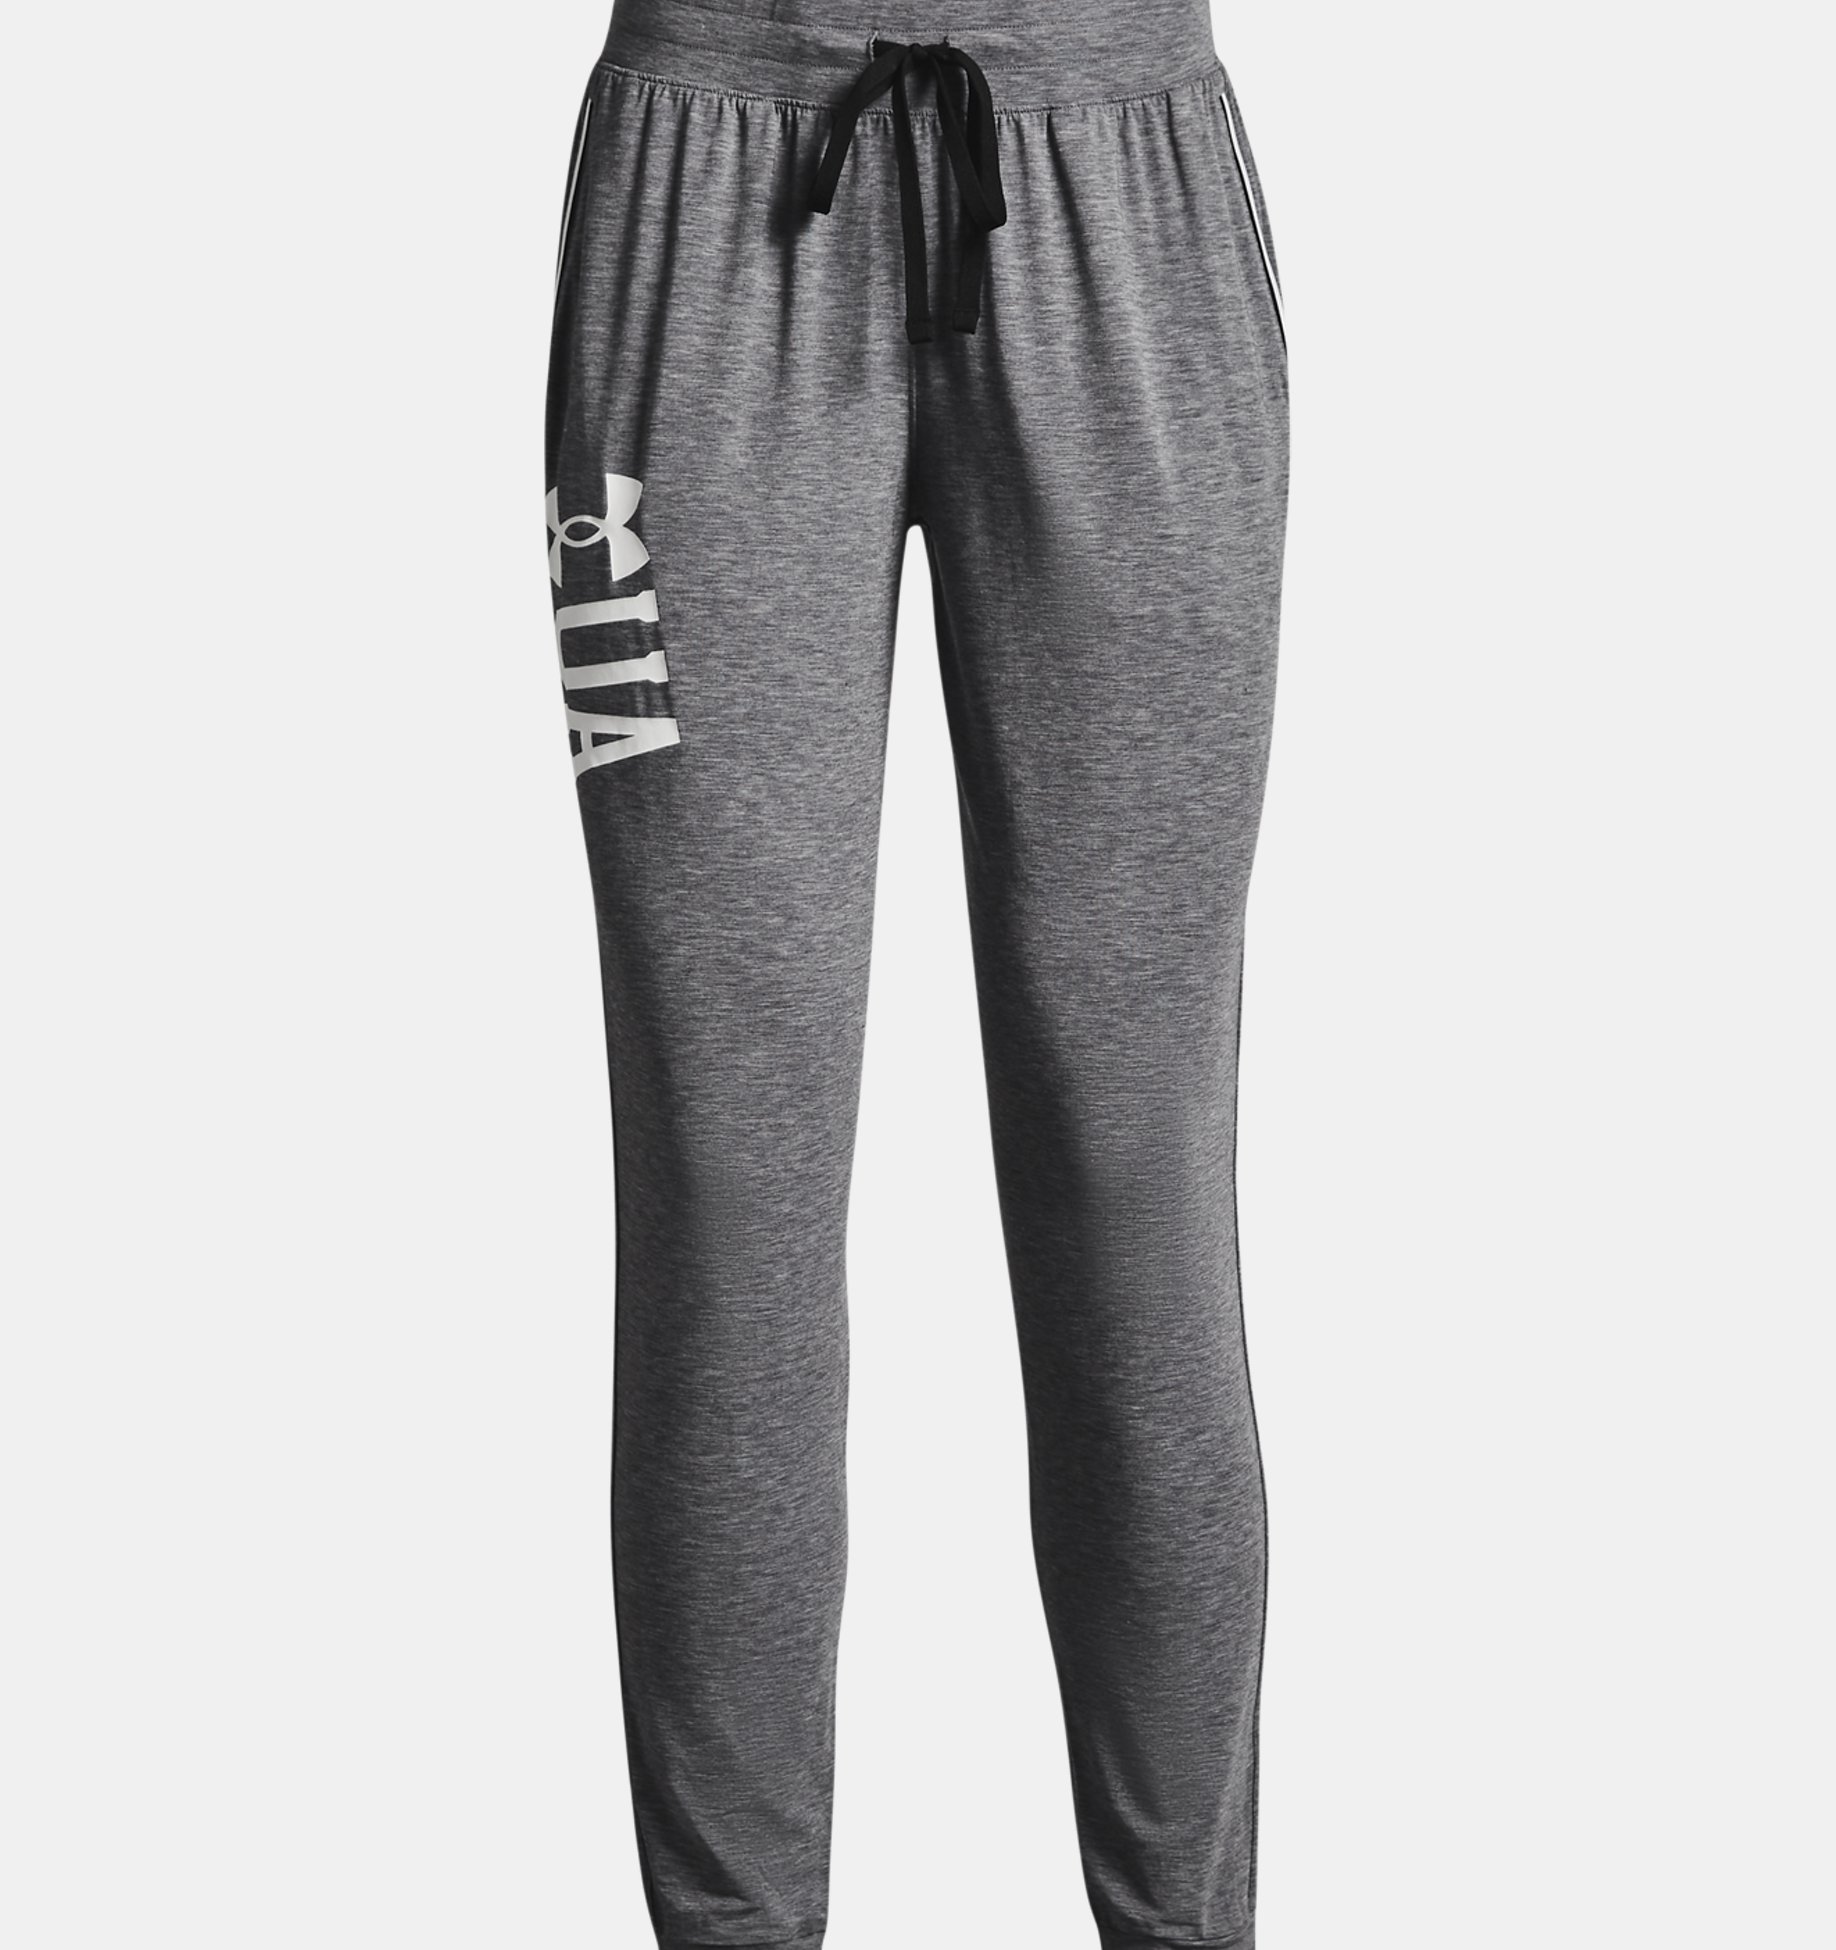 Under Armour Womens Recovery Sleepwear Joggers